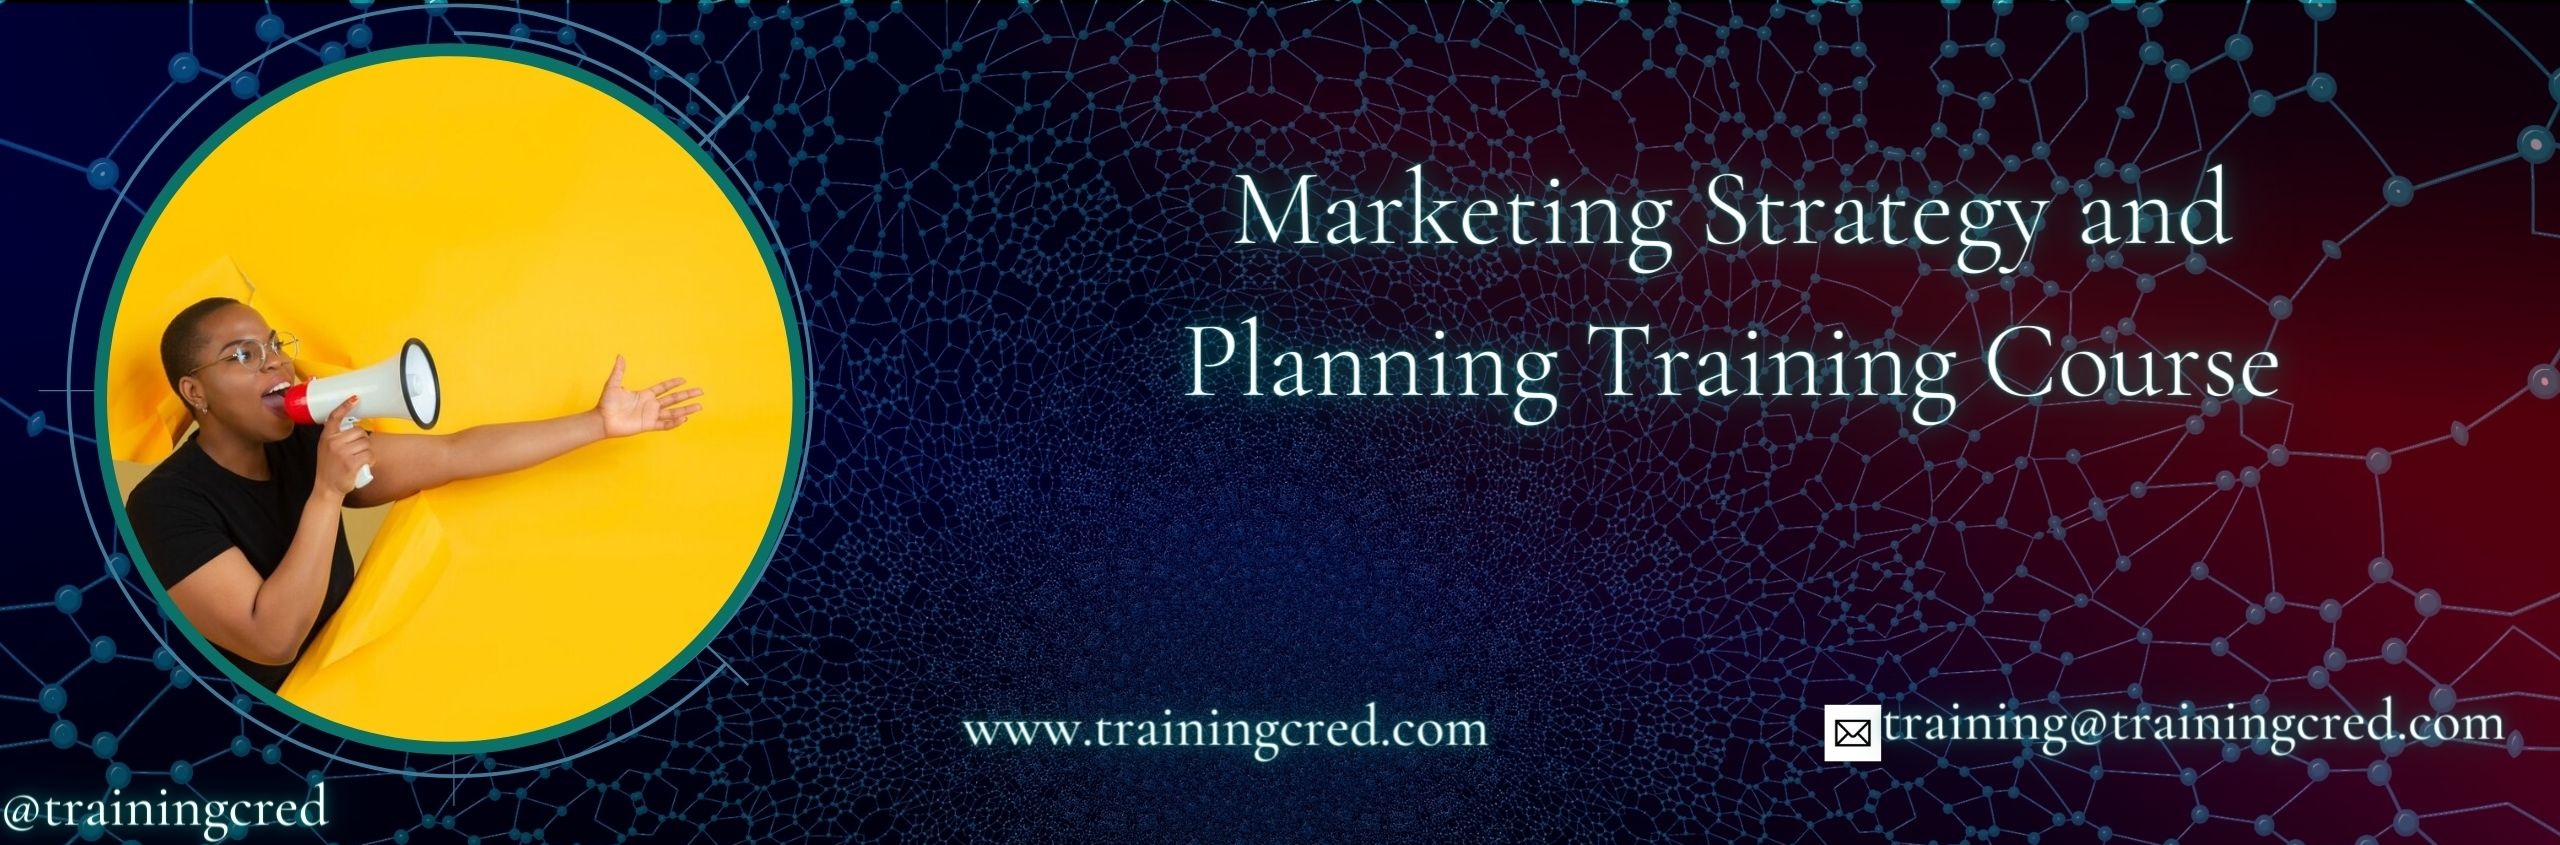 Marketing Strategy and Planning Training